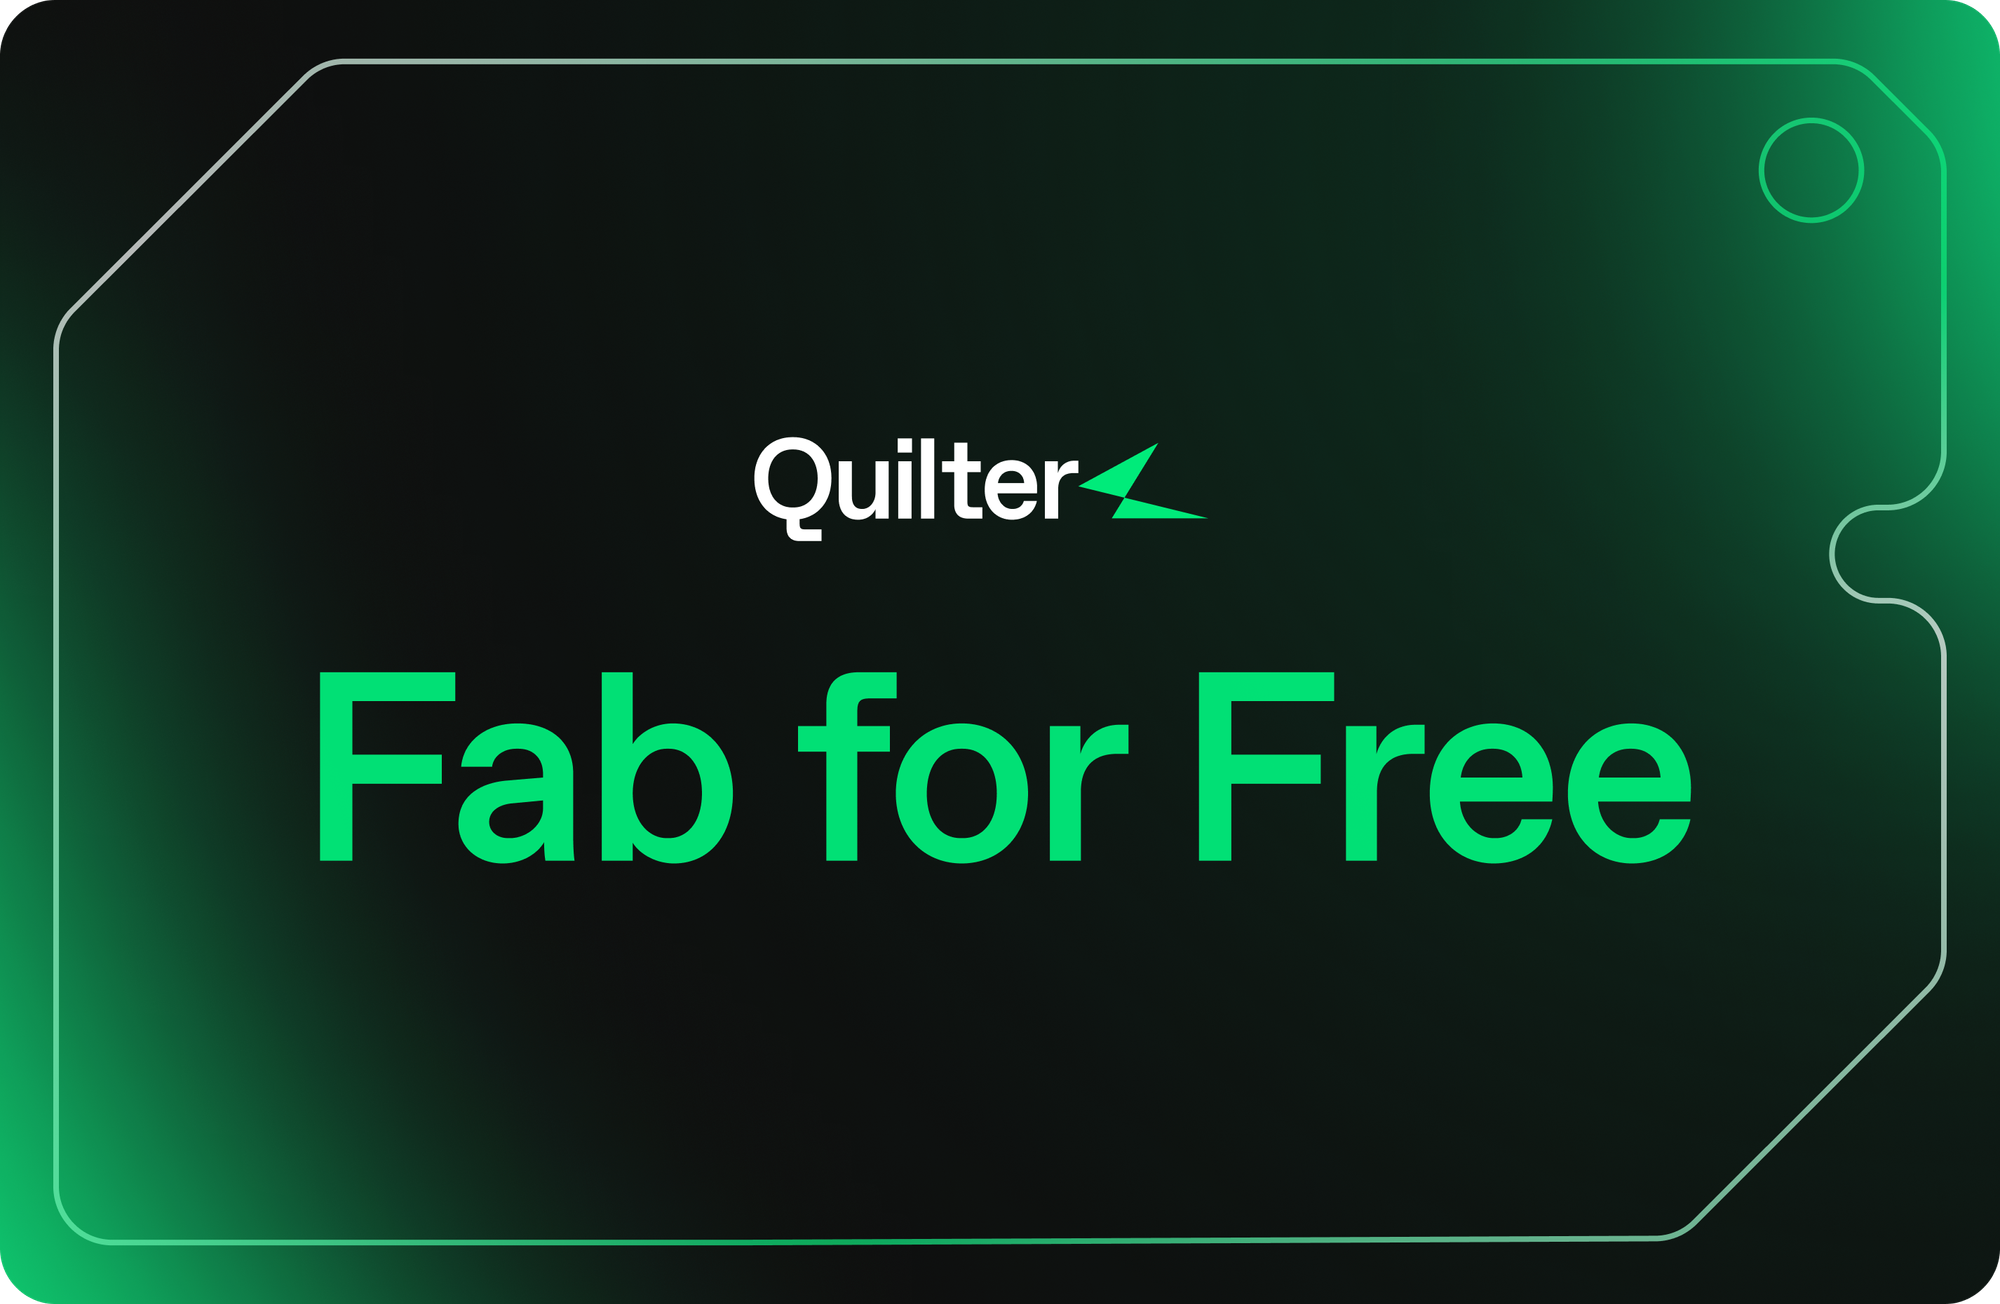 Announcing our "Fab for Free" program